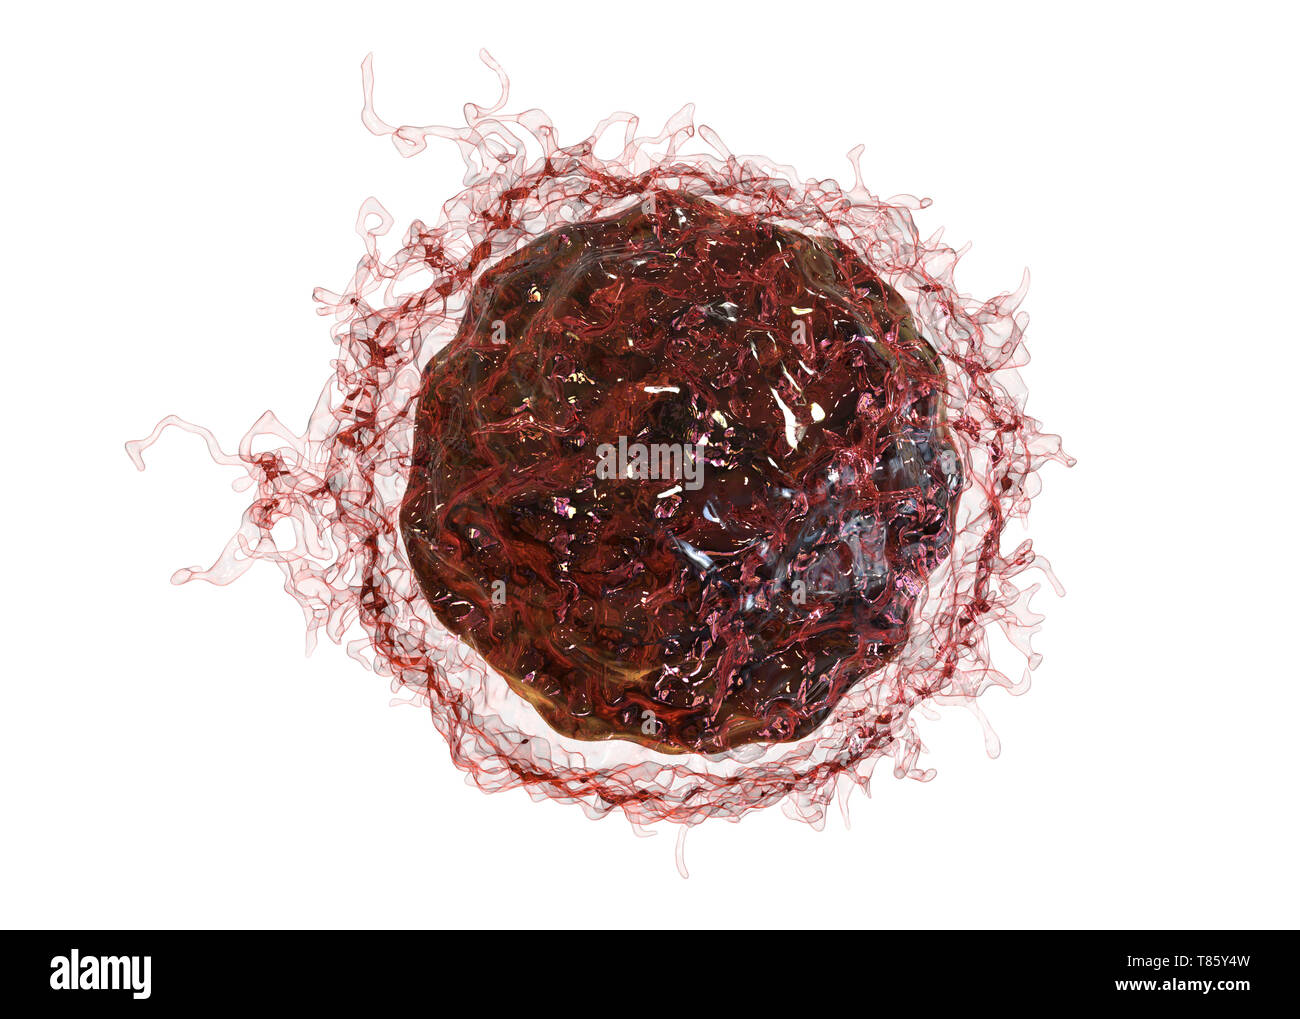 Cancer cell, illustration Stock Photo